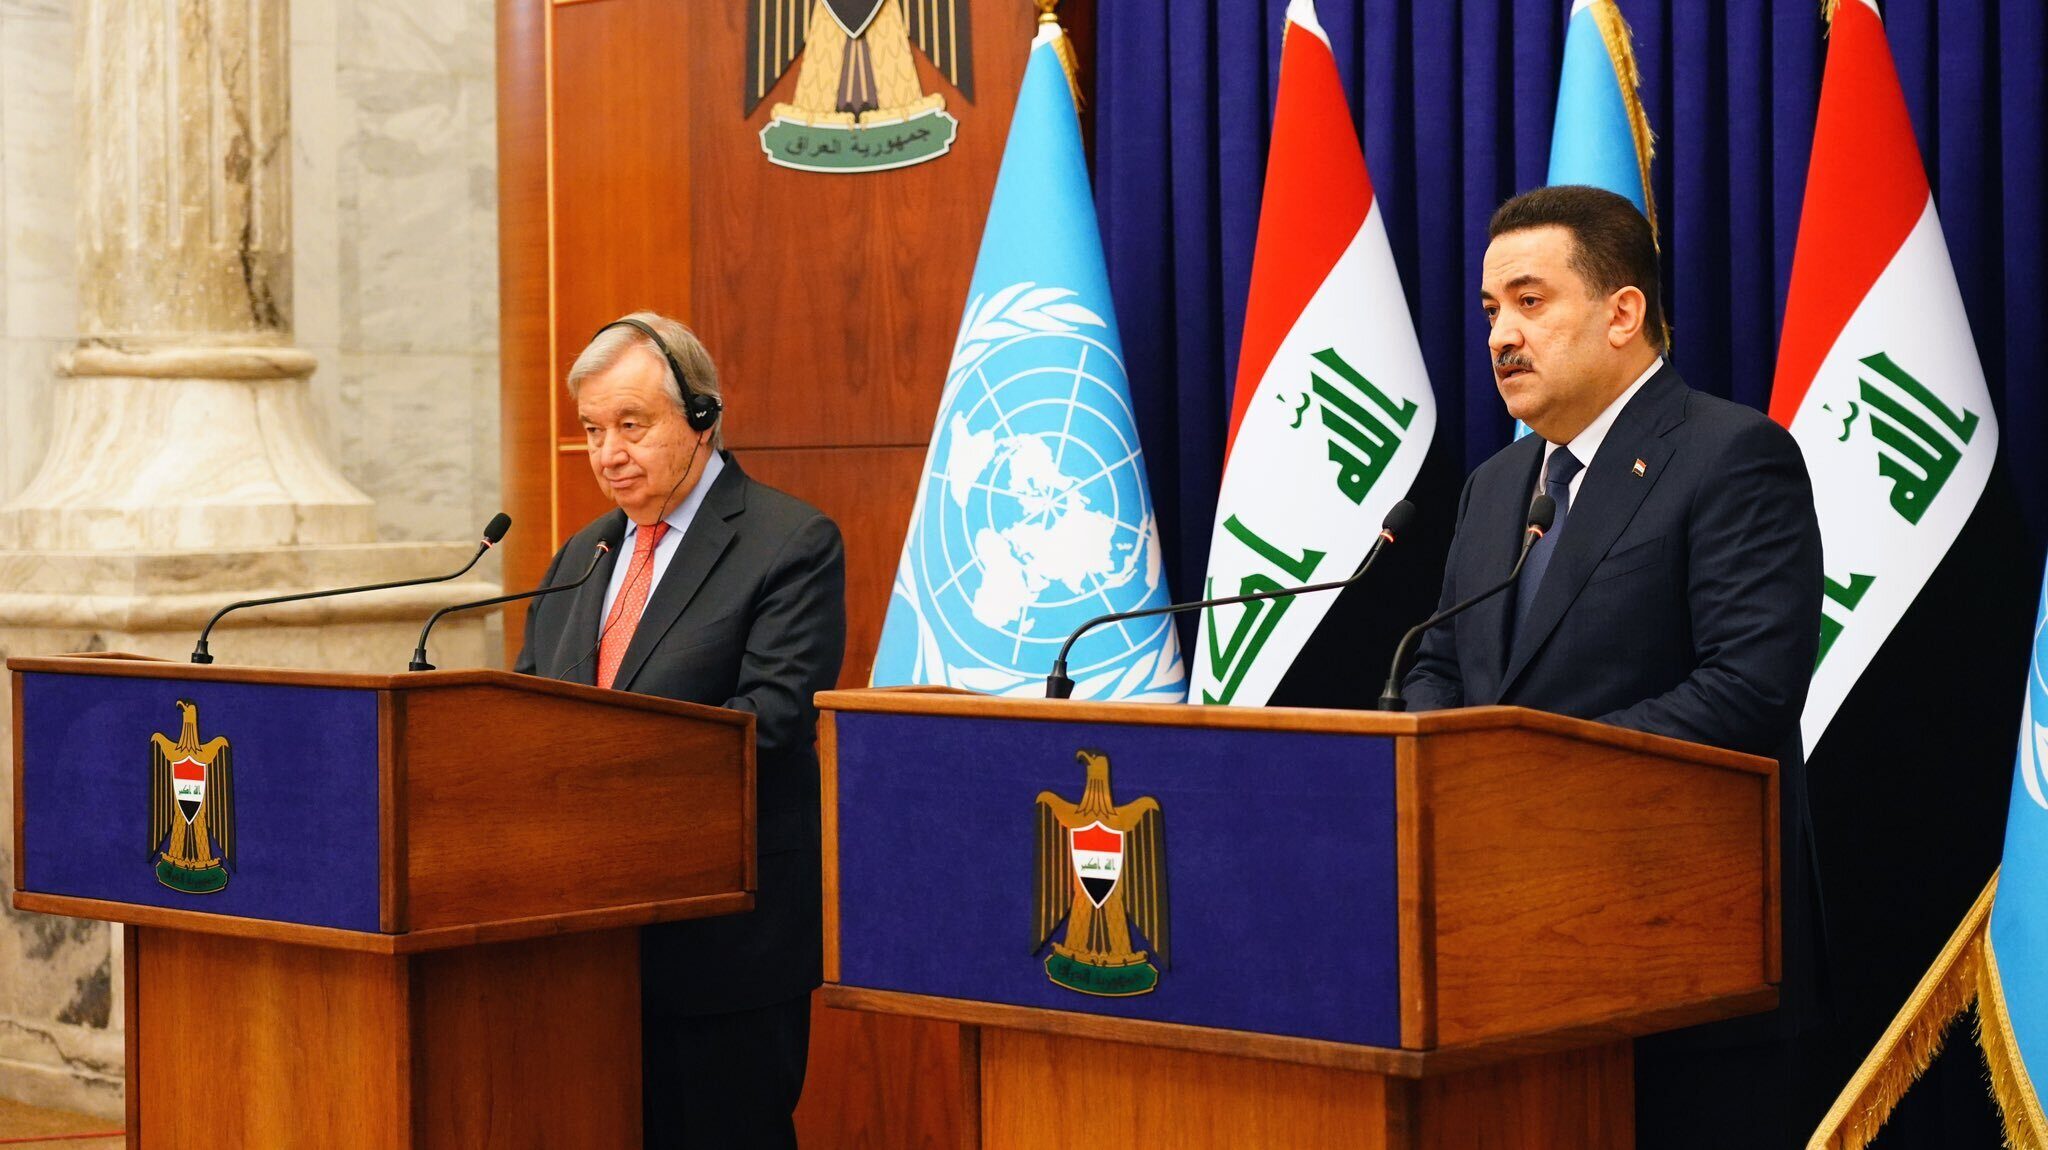 UN Chief Urges Iraq To Break Cycles of Instability, Fragility